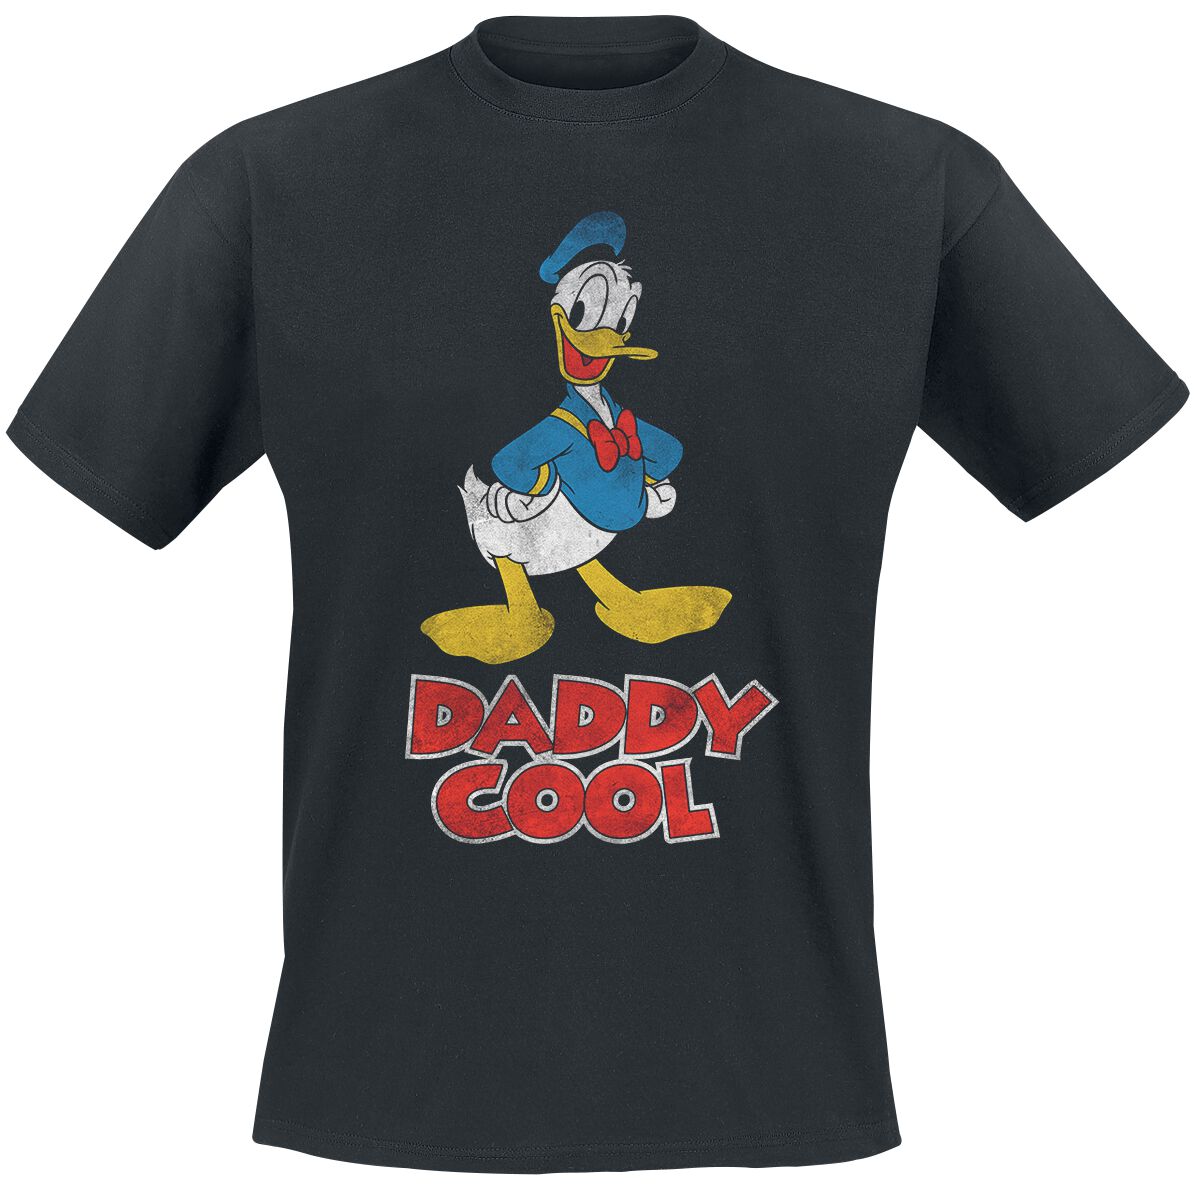 Image of Micky Maus Donald Duck - Daddy Cool T-Shirt schwarz